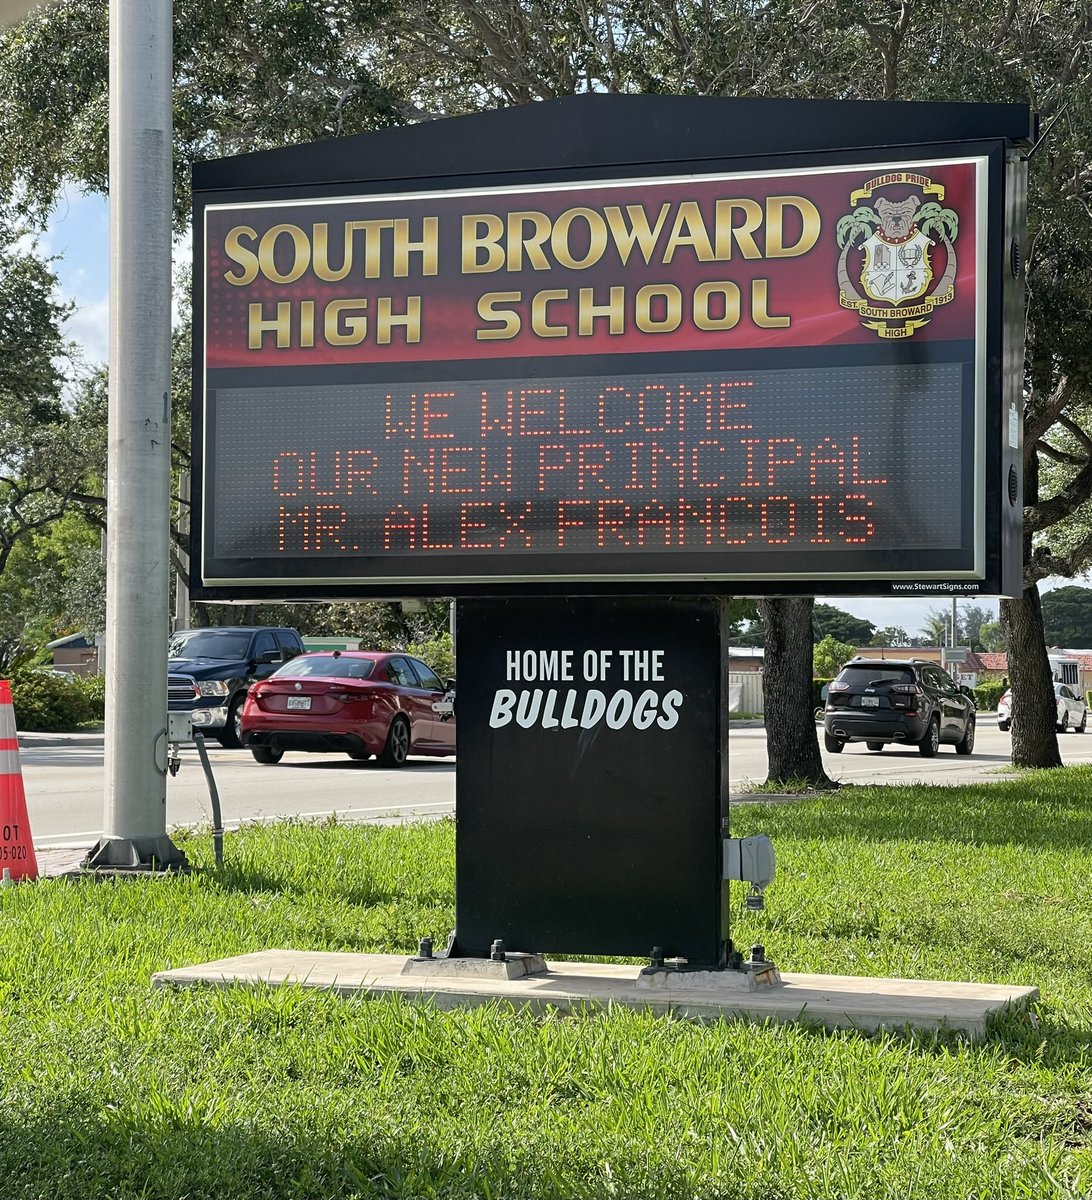 It is such an honor to be serving the South Broward community. I’m truly blessed and can’t wait to meet all my SBHS students, parents, faculty, and staff. #BulldogPride 🐶